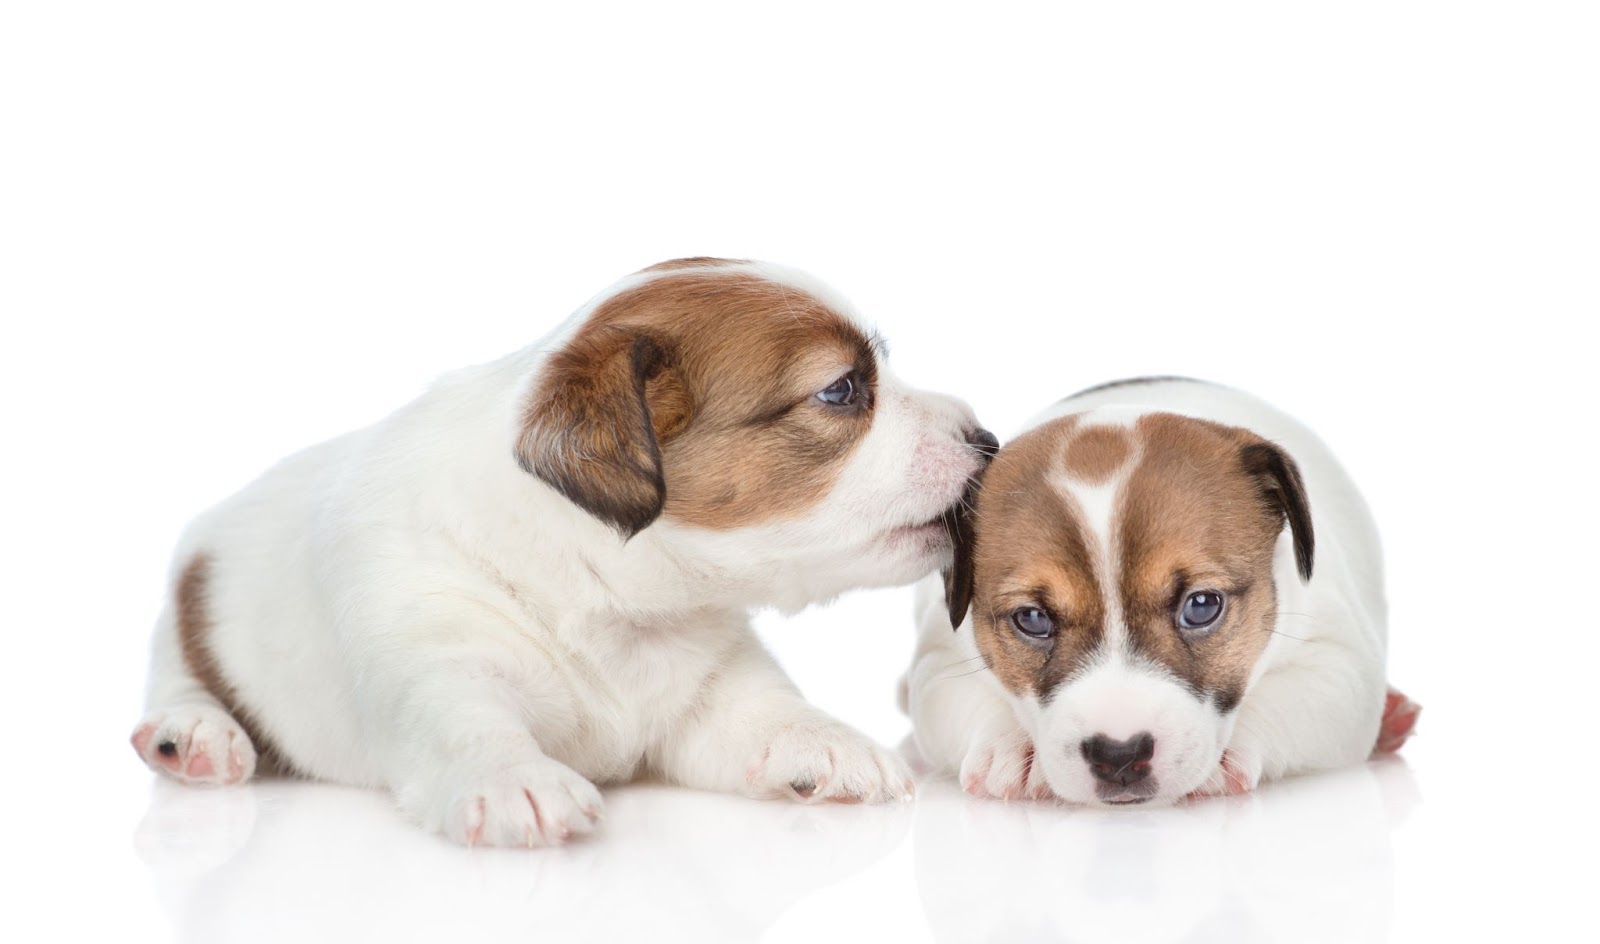 Why does your dog licks other dog's' ears?